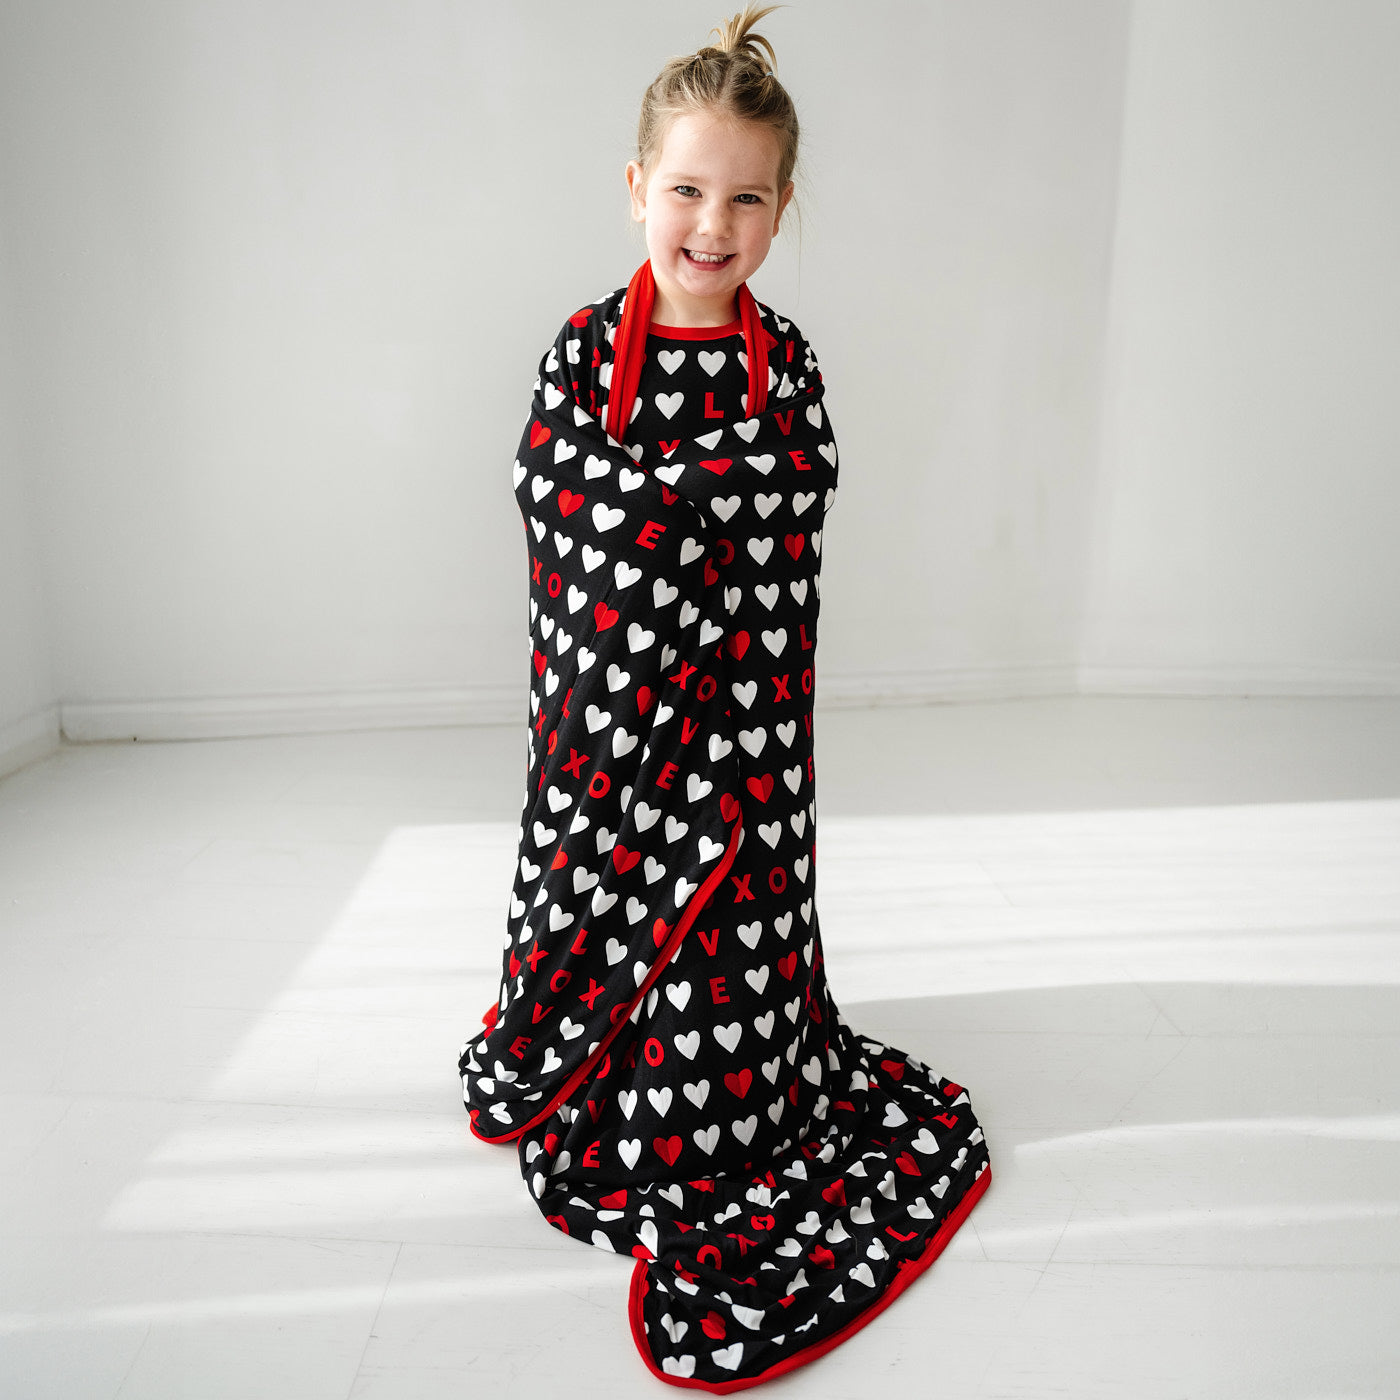 Child wrapped up in a Black XOXO large cloud blanket